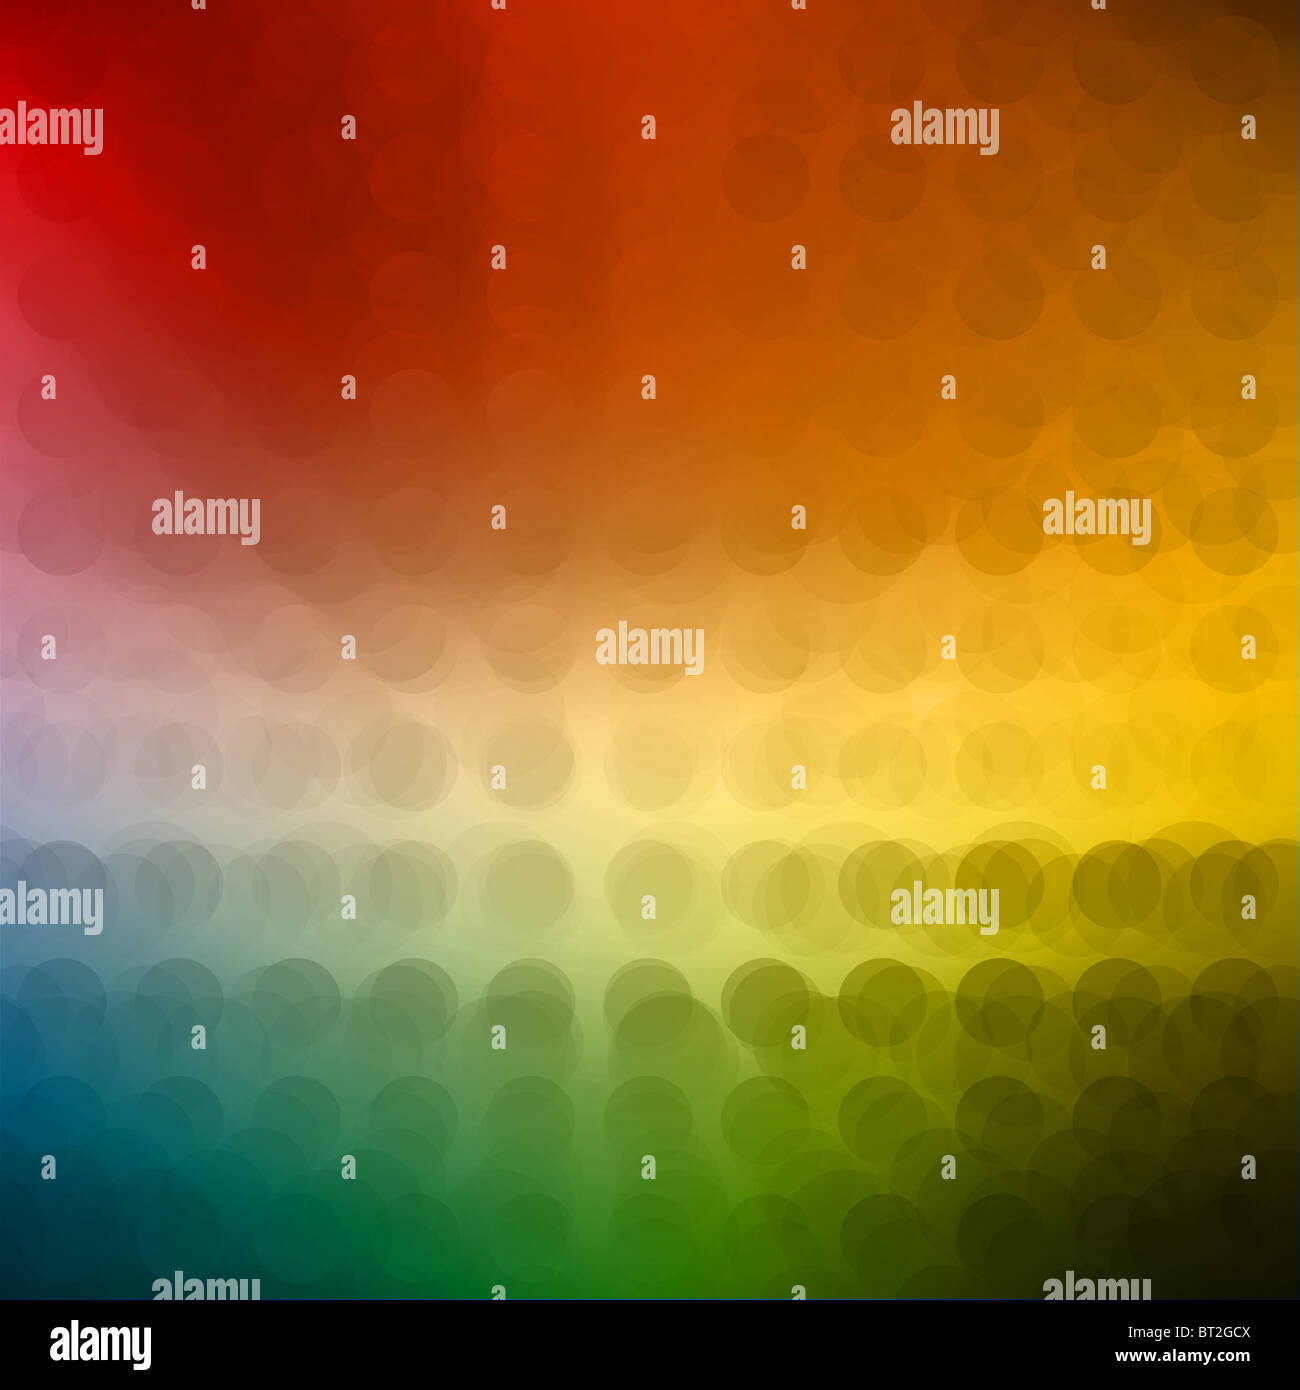 Abstract background of a colorful glass-like pattern Stock Photo